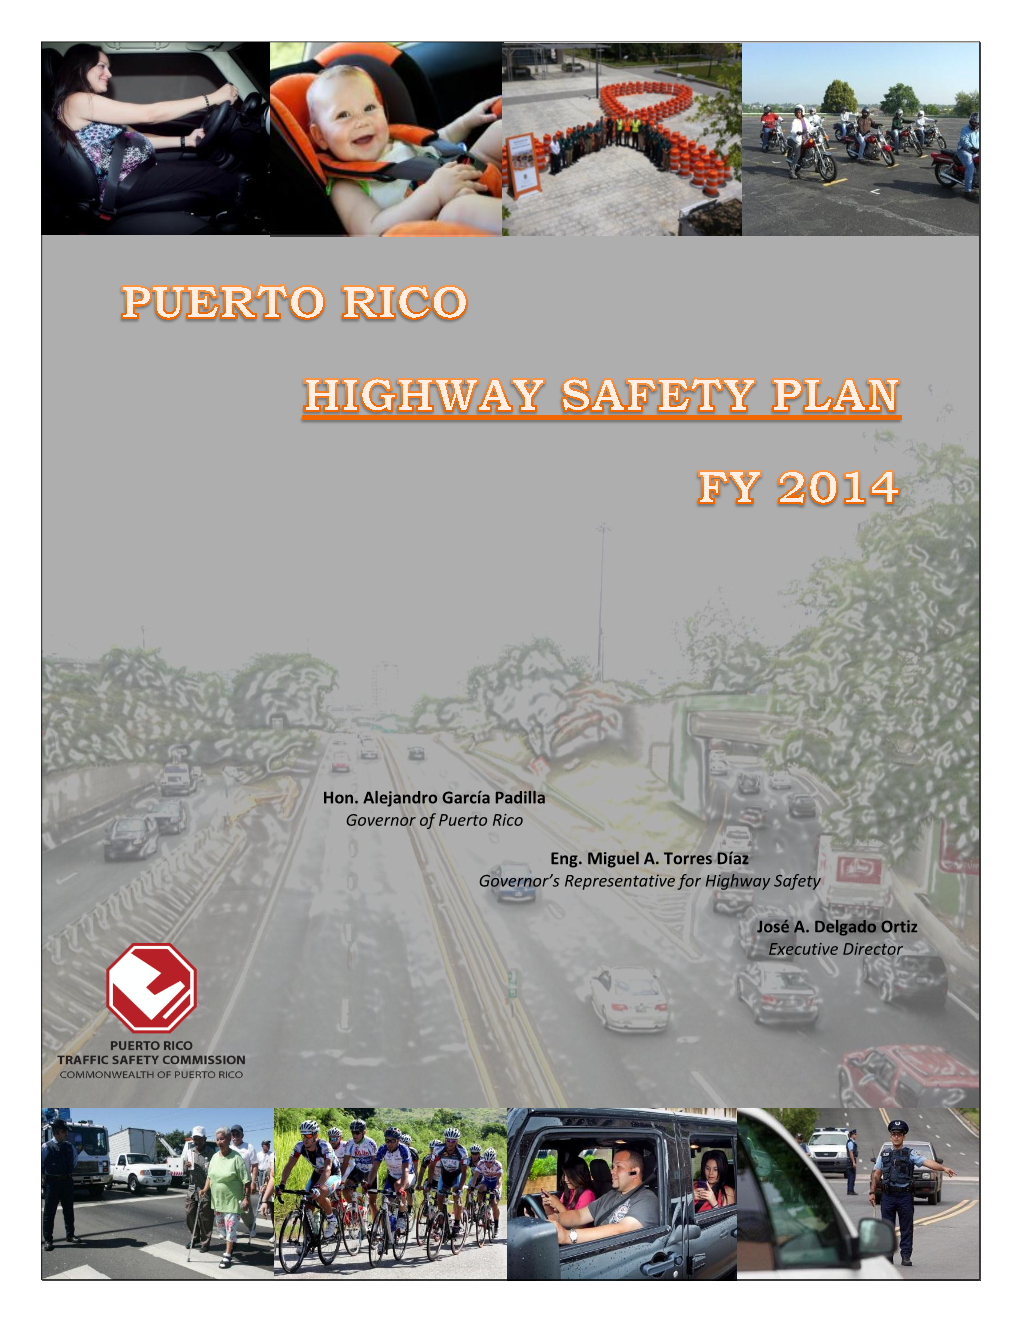 Puerto Rico Traffic Safety Commission –Highway Safety Plan 2014